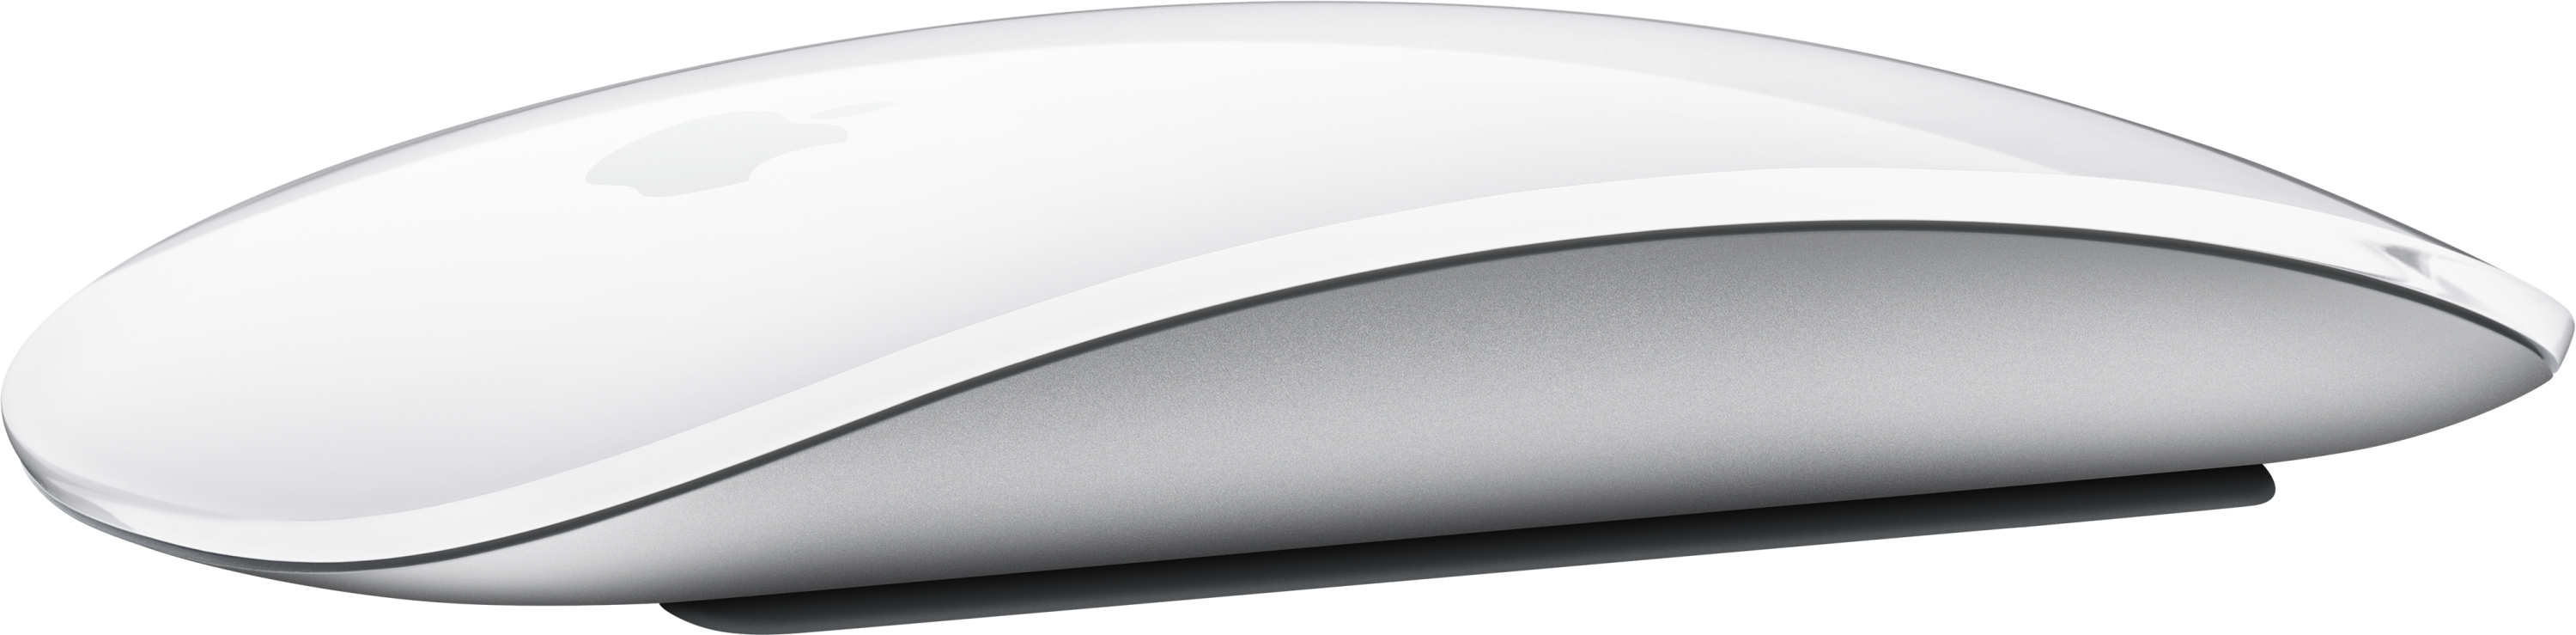 Eureka! Apple will finally update its Magic Mouse to USB-C and ditch  Lightning